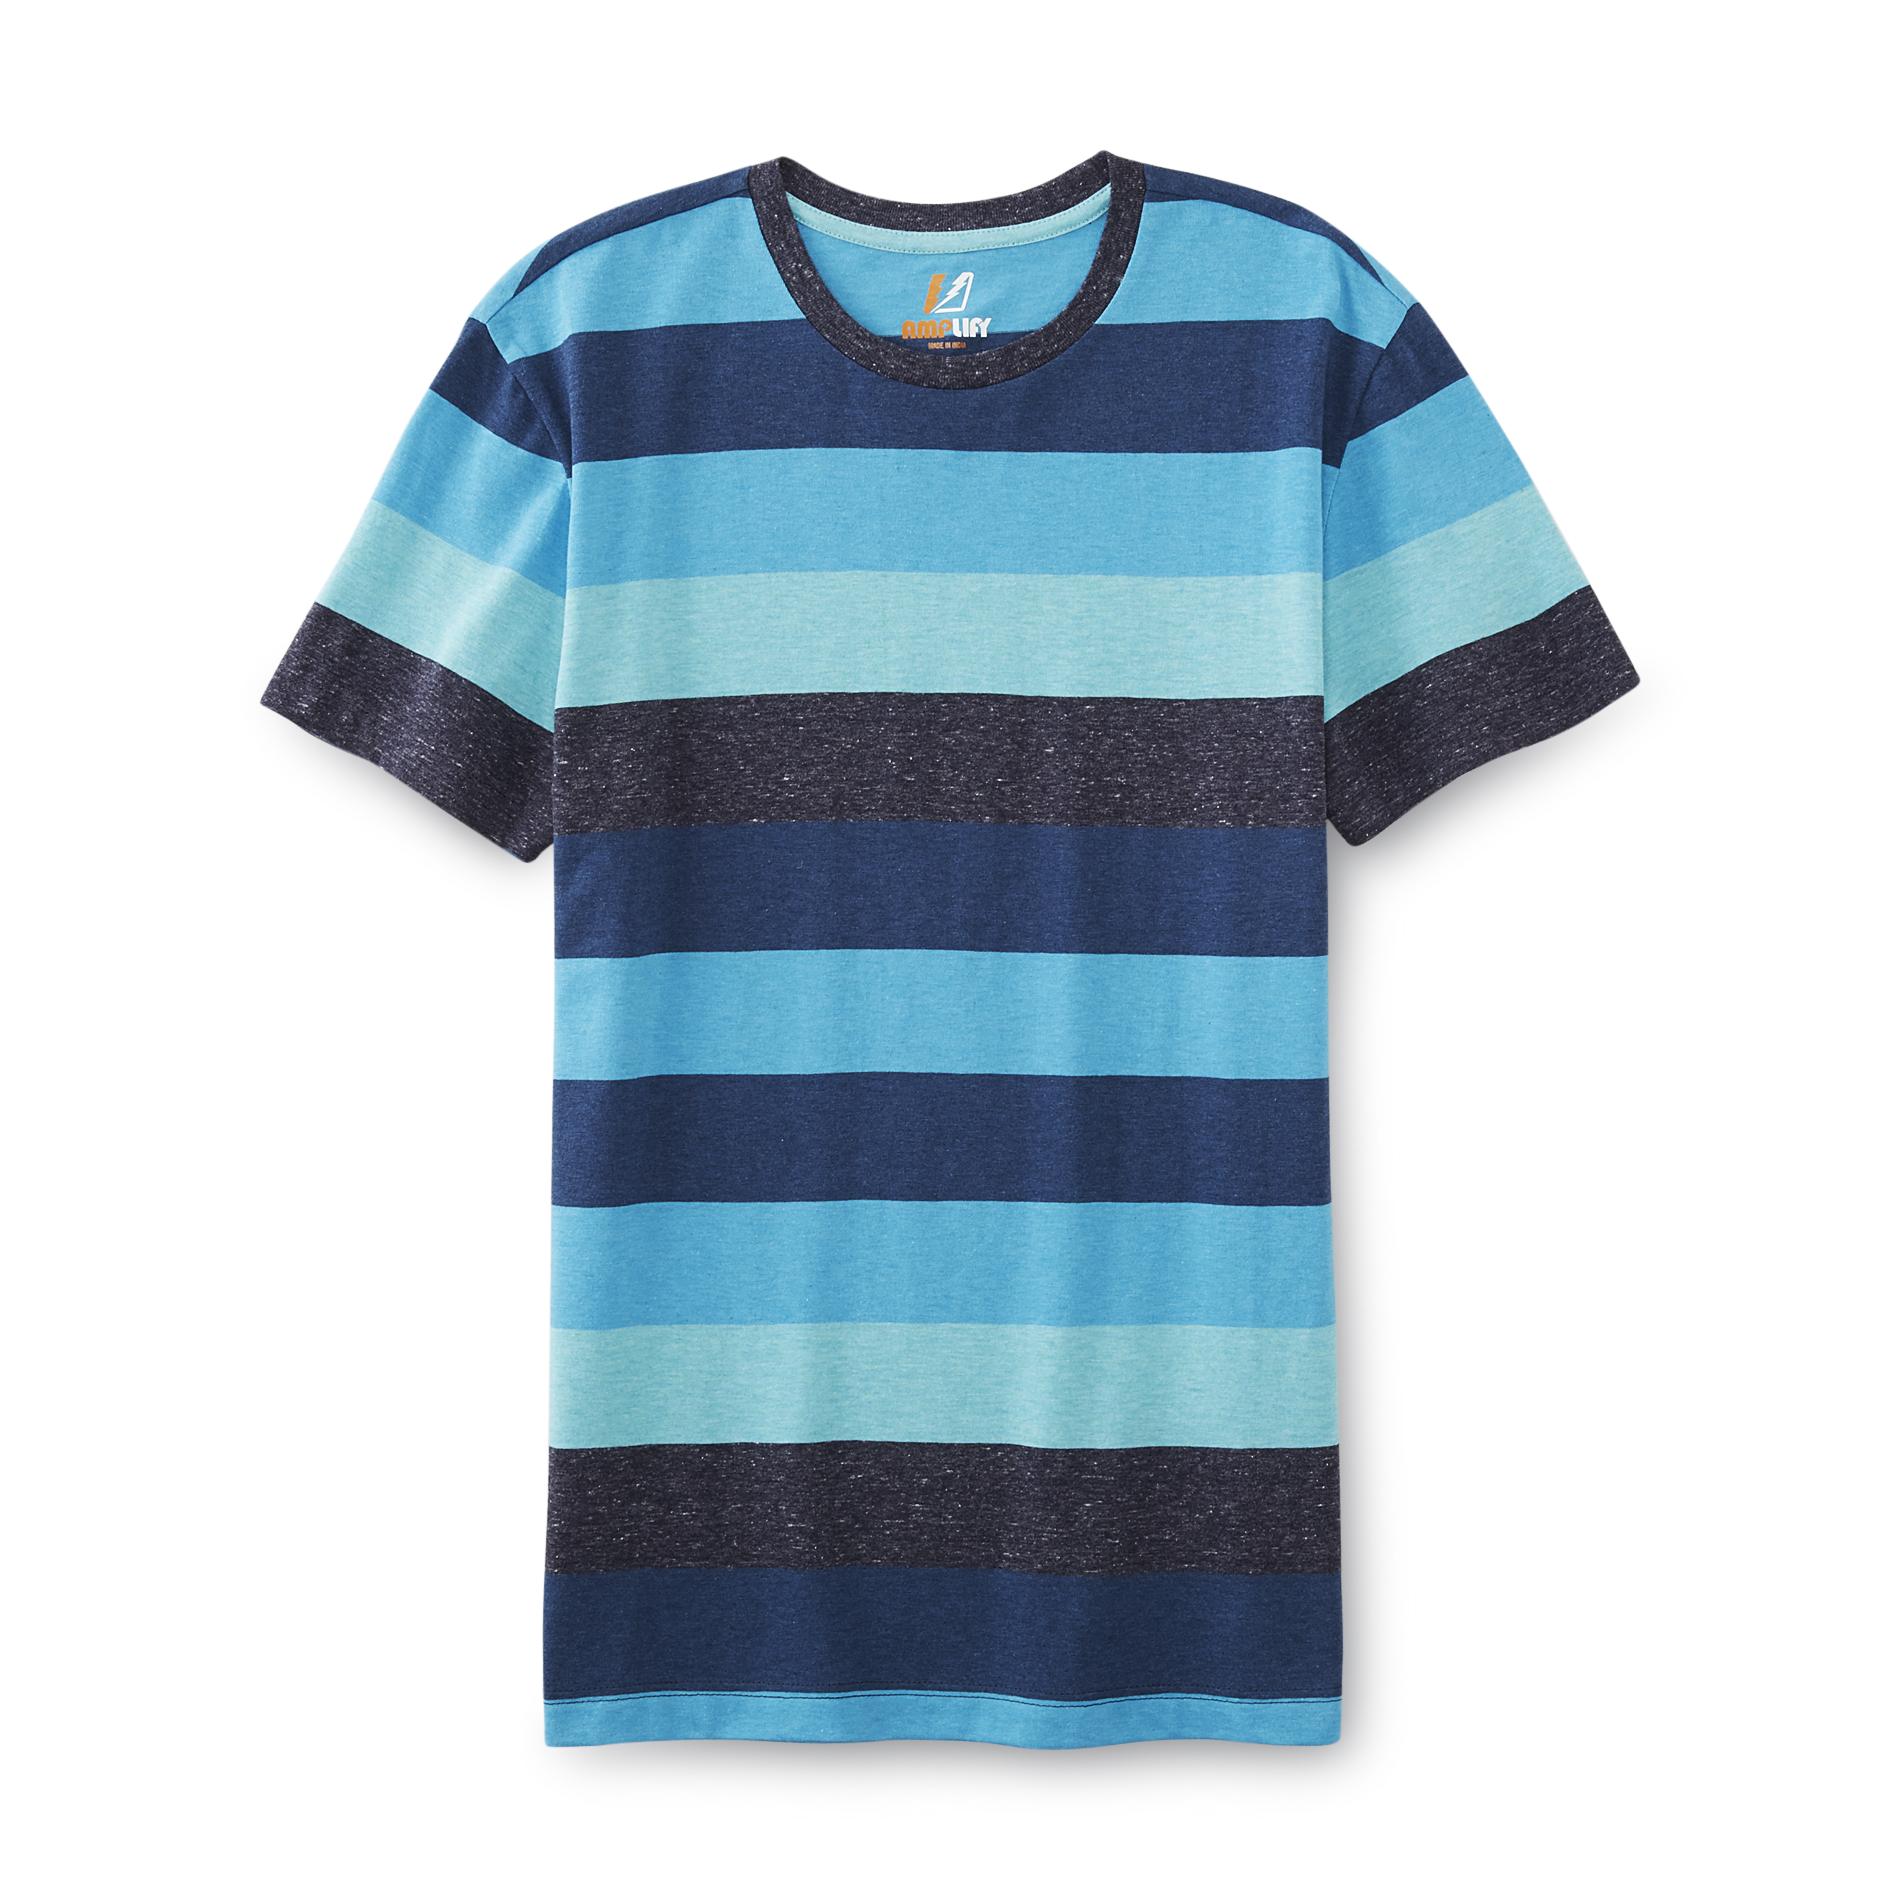 Amplify Young Men's Short-Sleeve T-Shirt - Striped